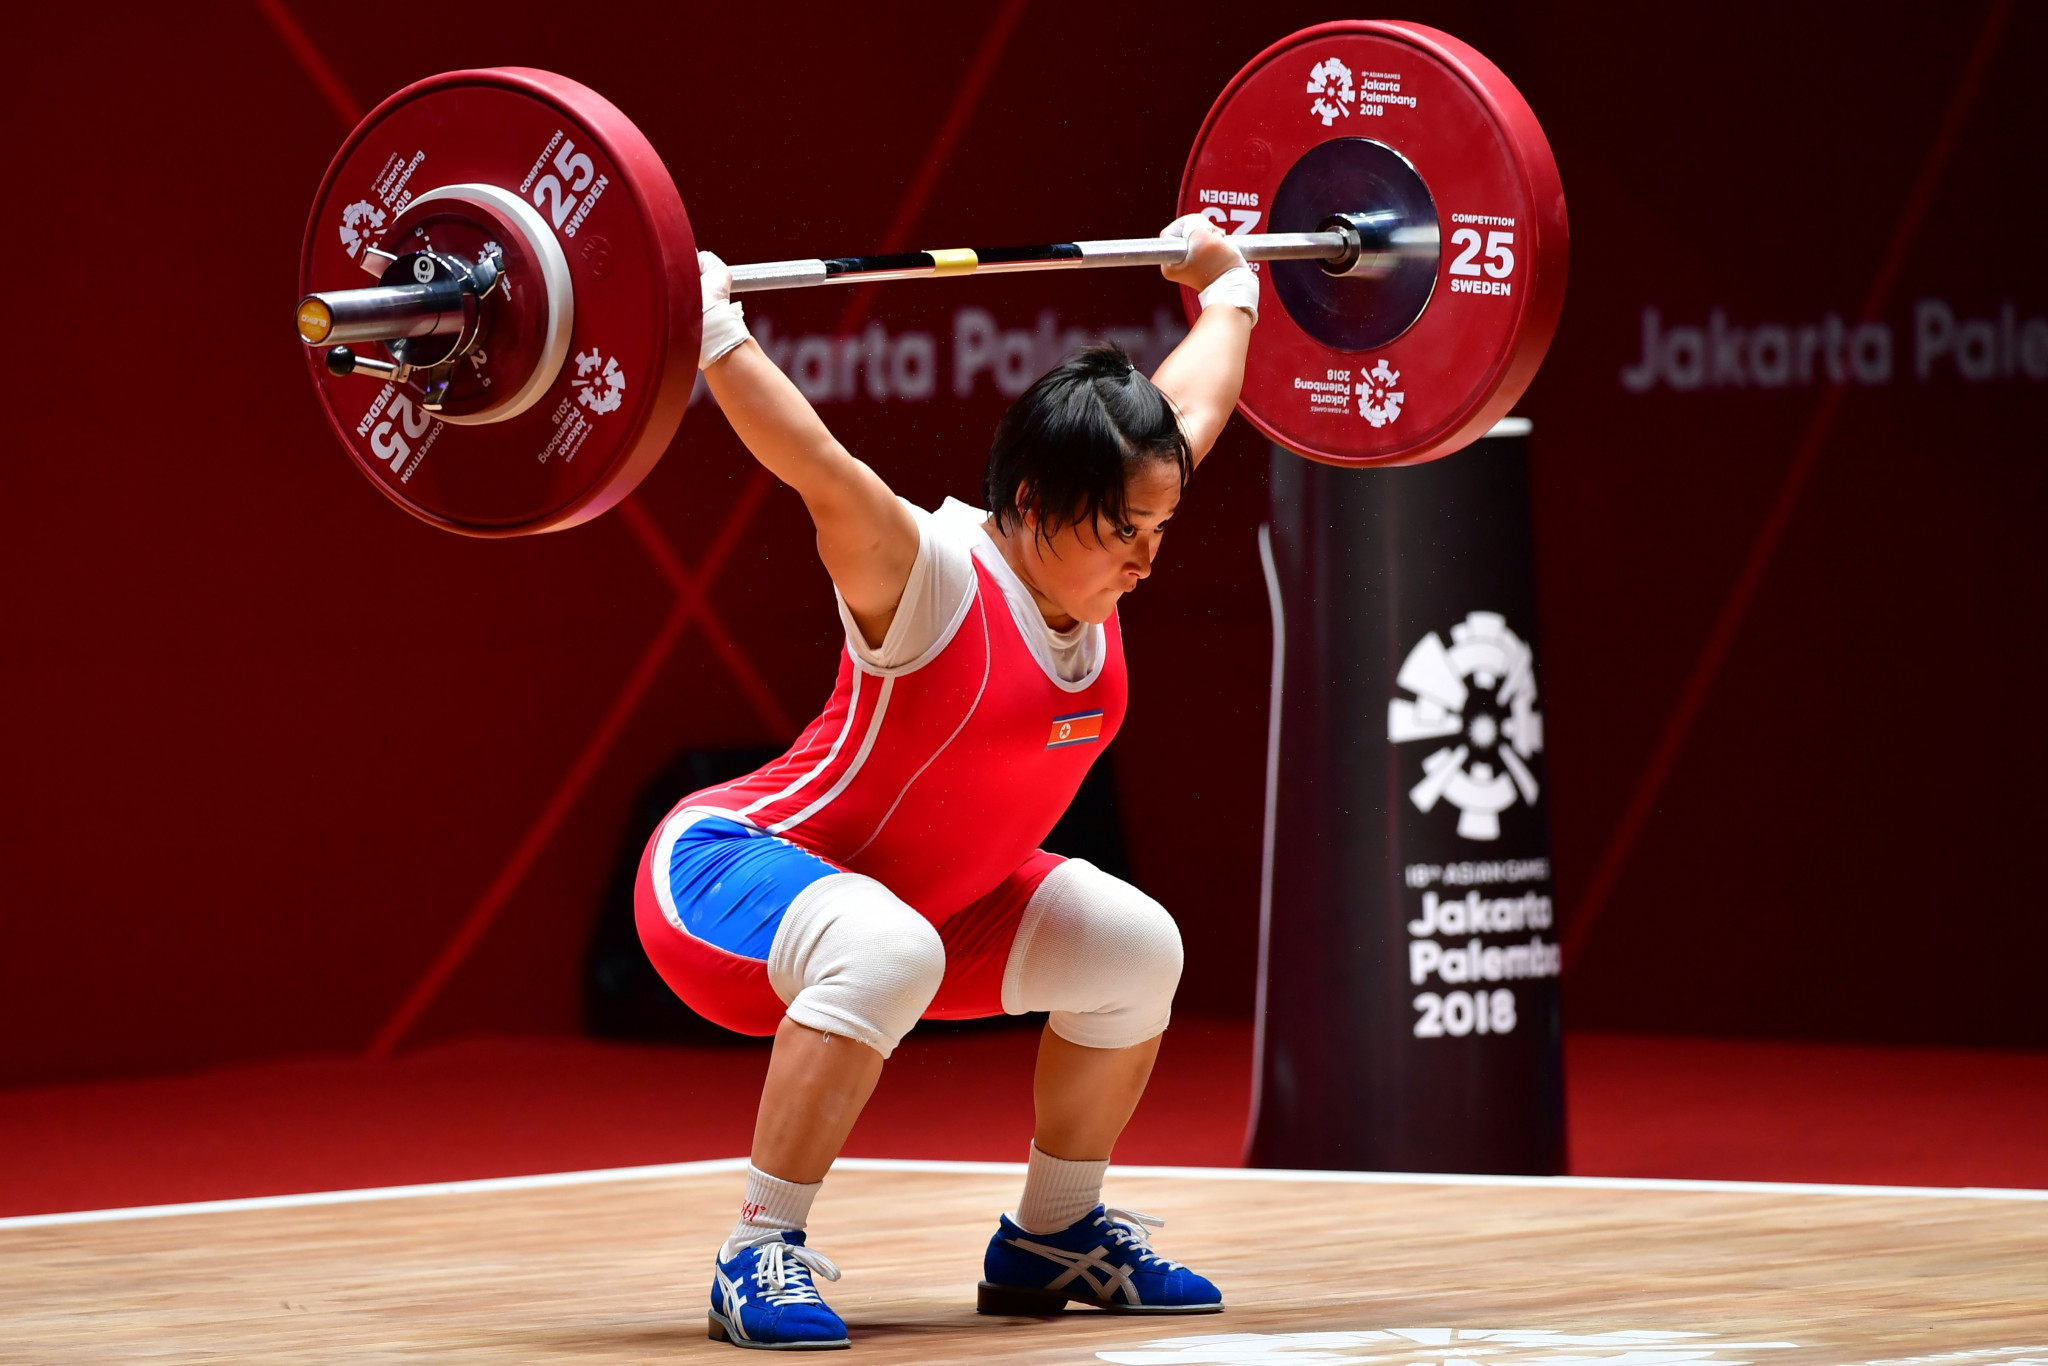 Compatriot Ri Song Gum had earlier come out on top in the women's 48kg event ©Getty Images